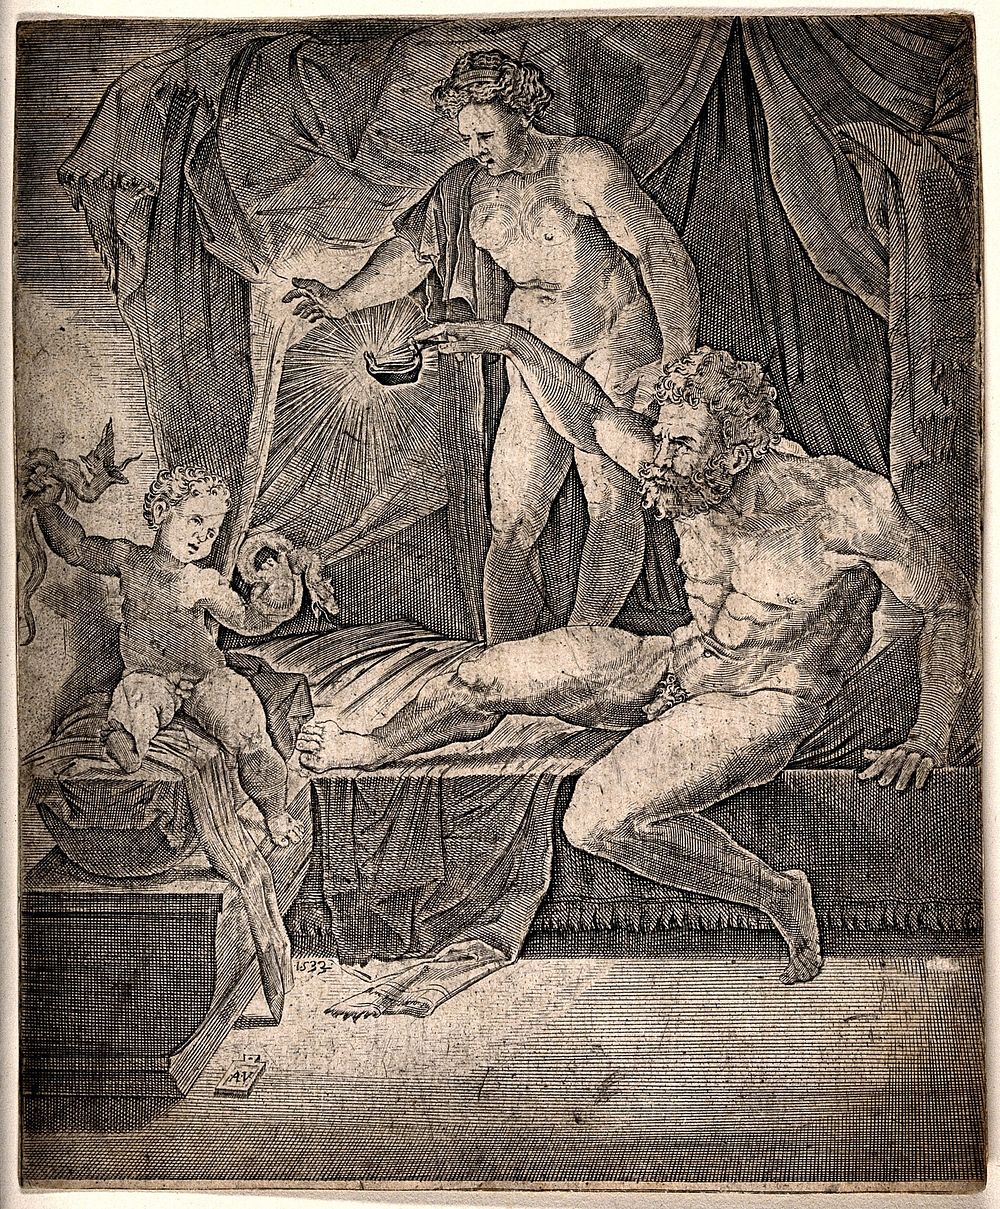 The infant Hercules strangling snakes. Engraving by Agostino Veneziano, 1533, after Giulio Romano.